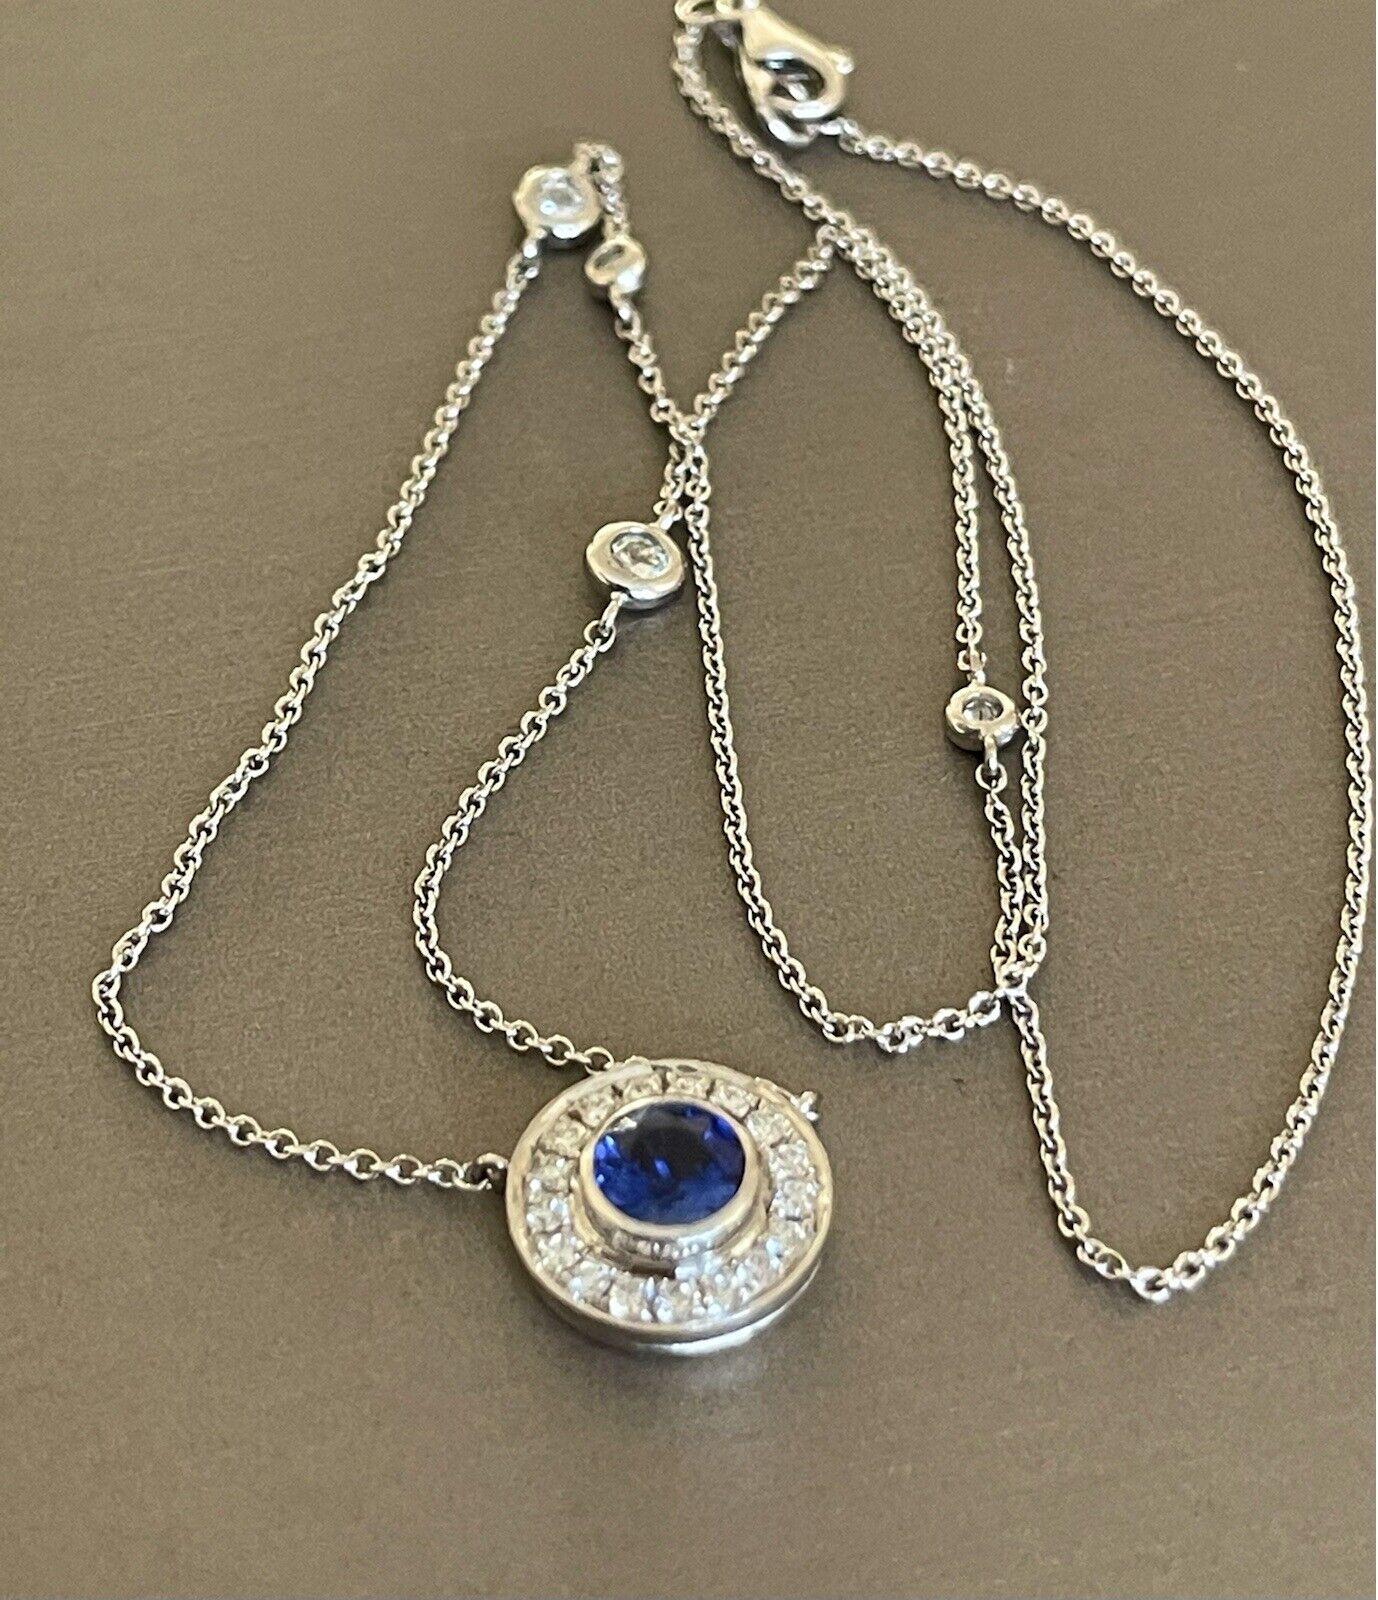 

Quintessentially British fine jewellery style meets modern chic high jewellery in this truly one of a kind necklace

Sparkling diamonds set with most amazing shade of blue natural sapphires.

Diamonds 0.70ct+

Sapphire 0.30ct

18 inch long

At